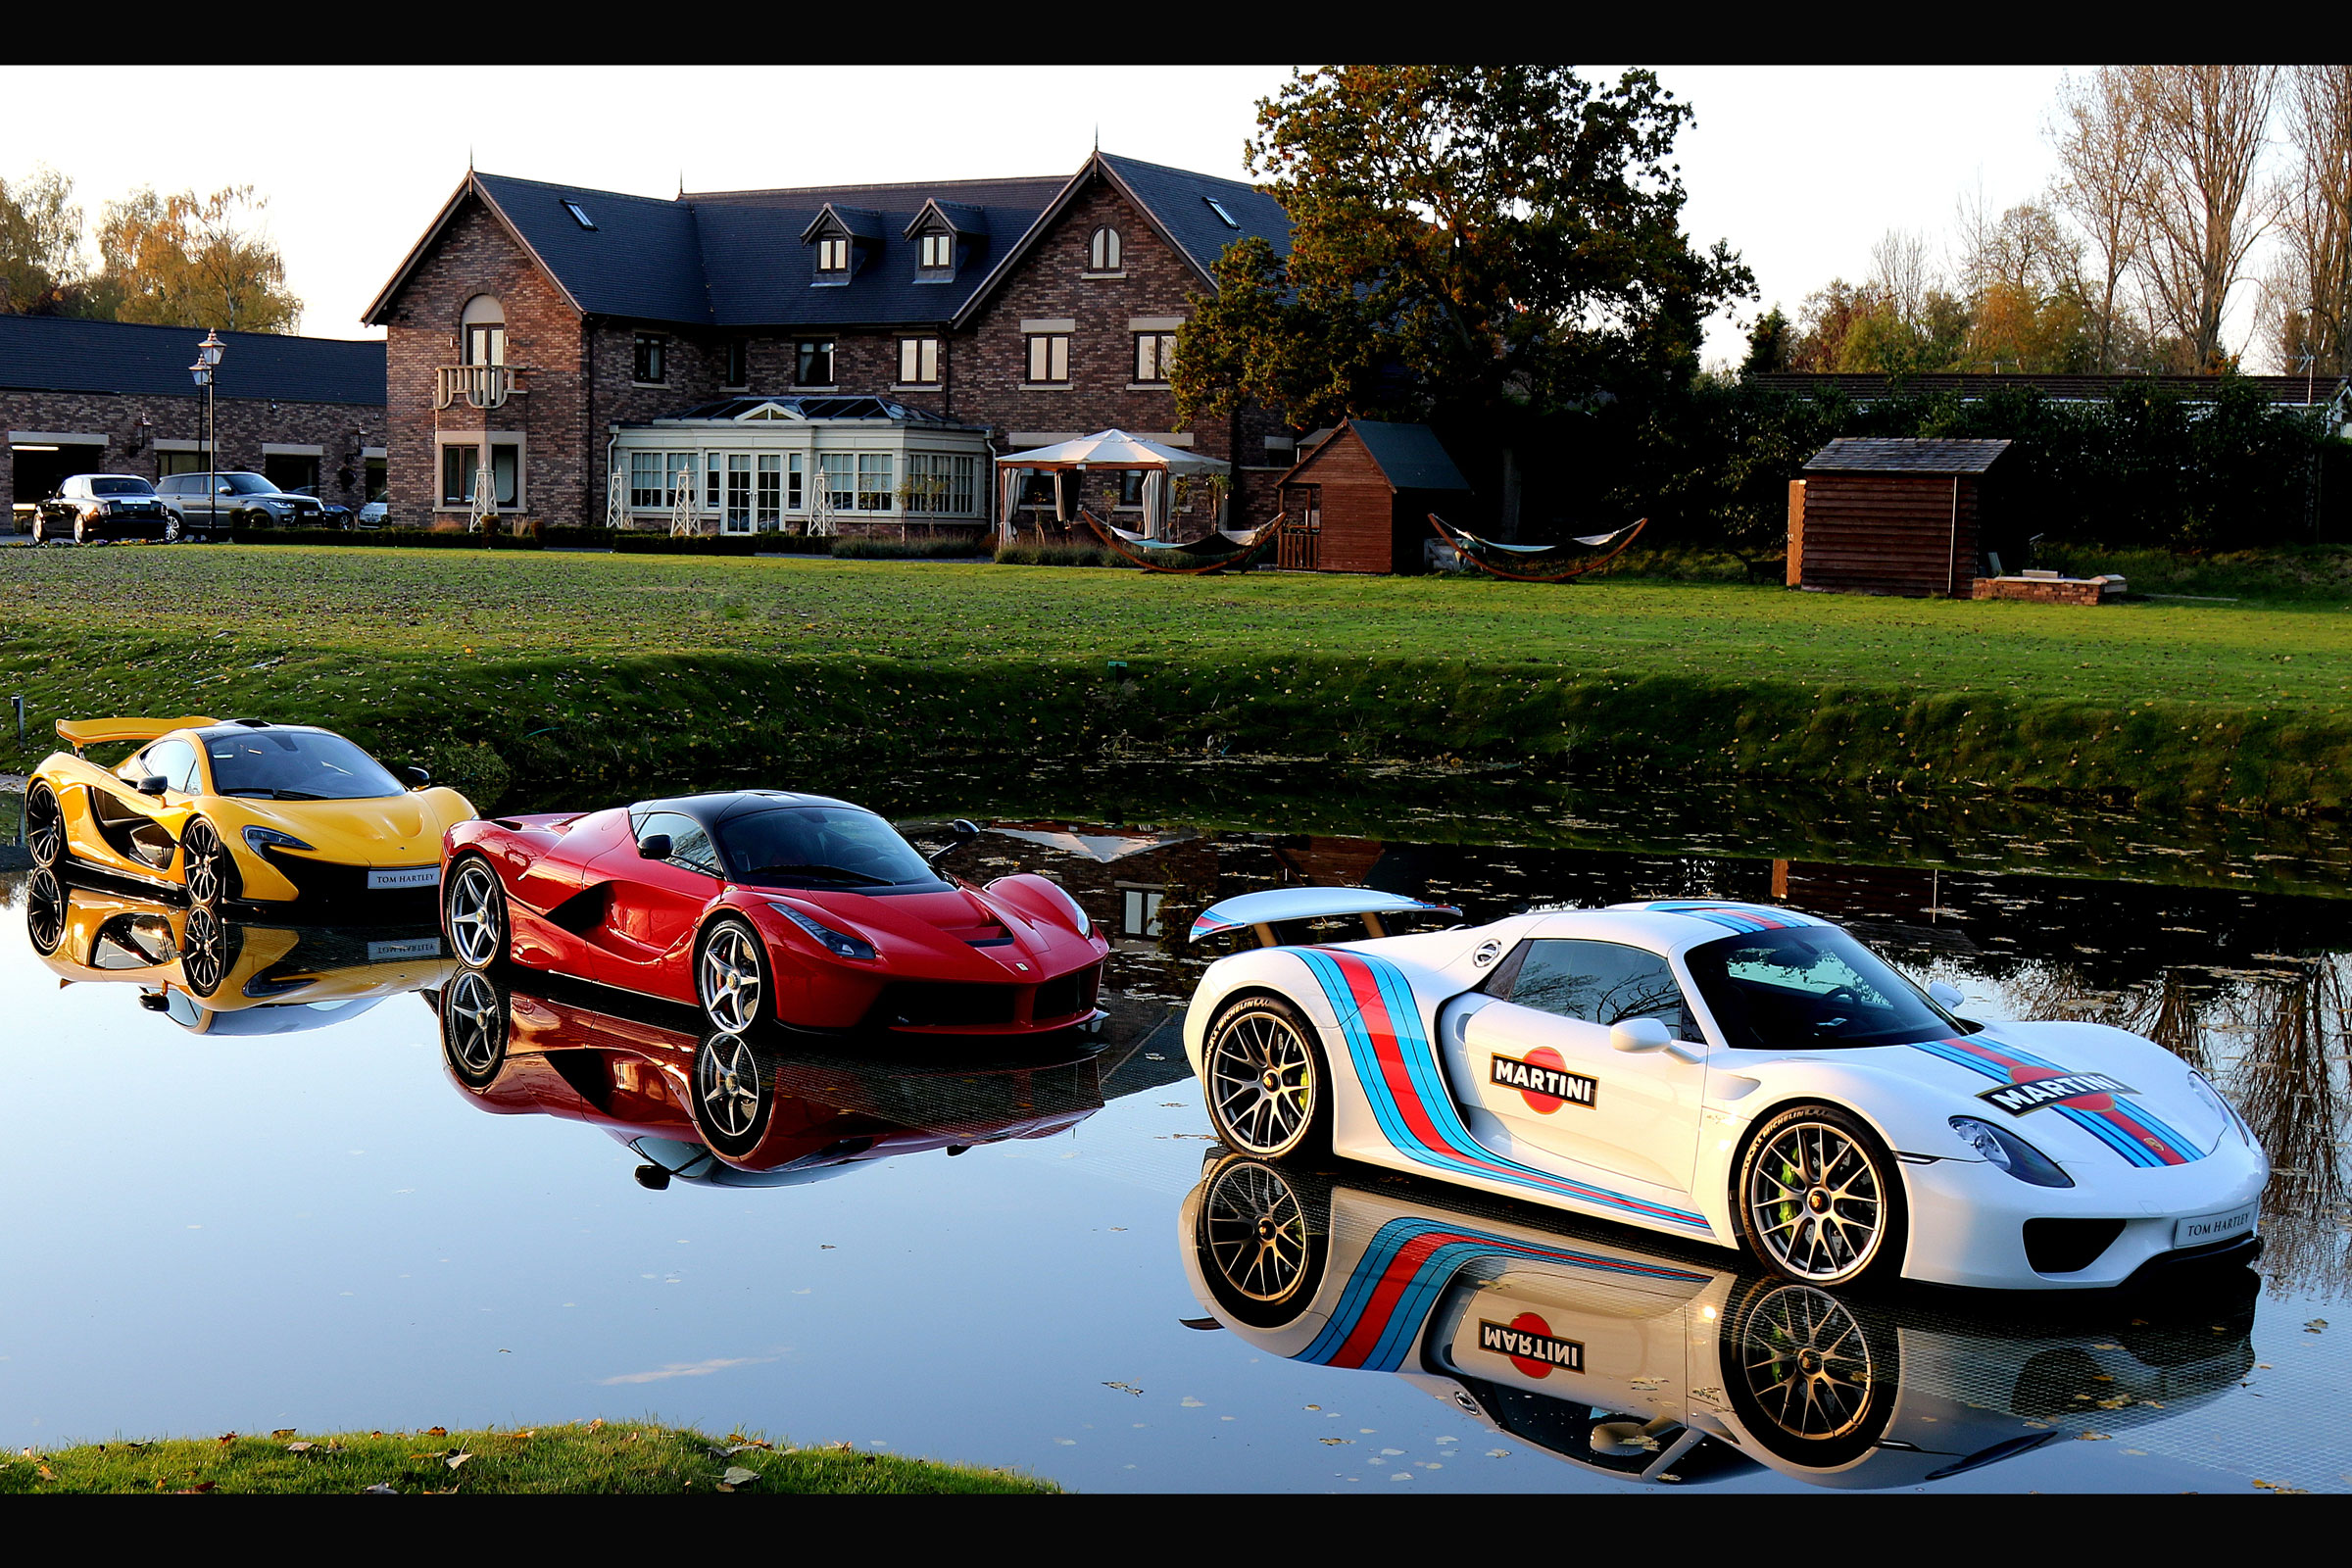 Supercars 'walk on water' with dealer's amazing floating 